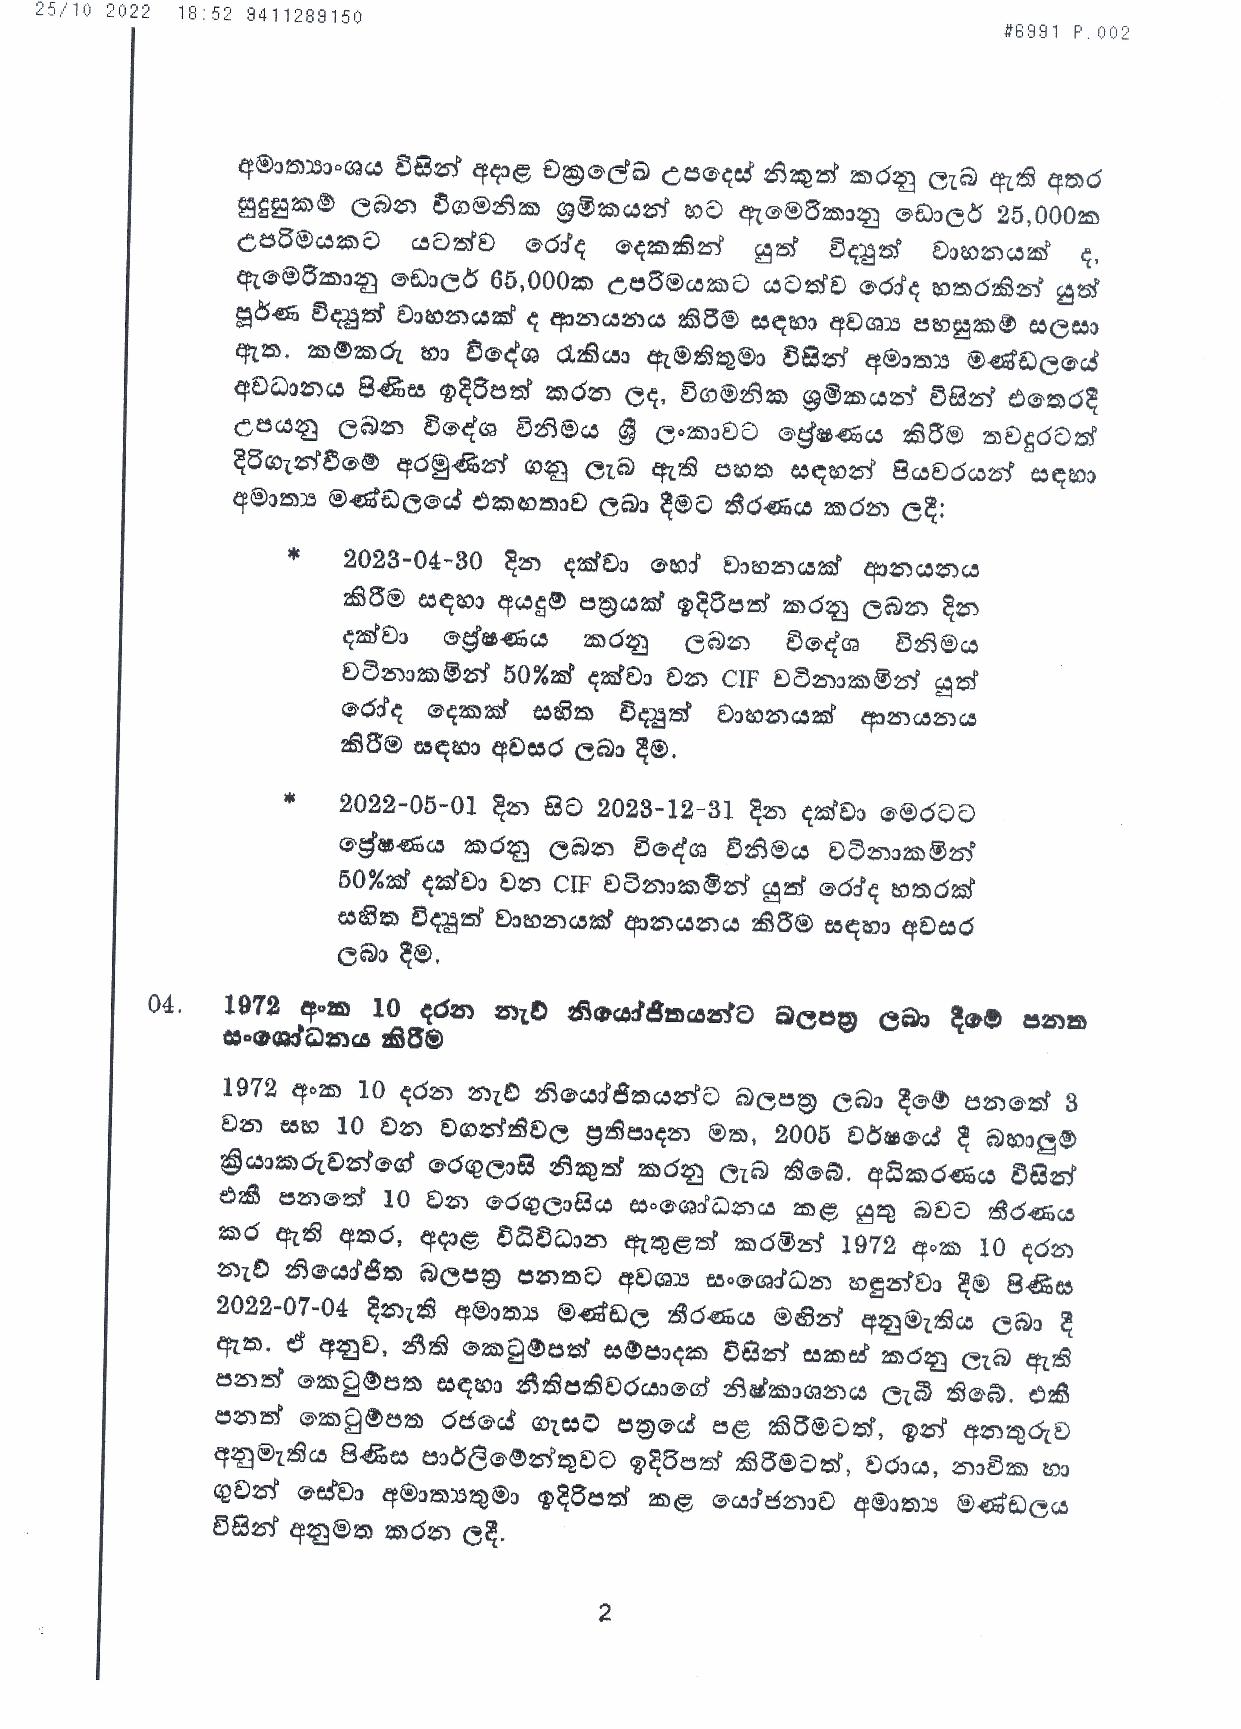 Cabinet Decision on 25.10.2022 page 002